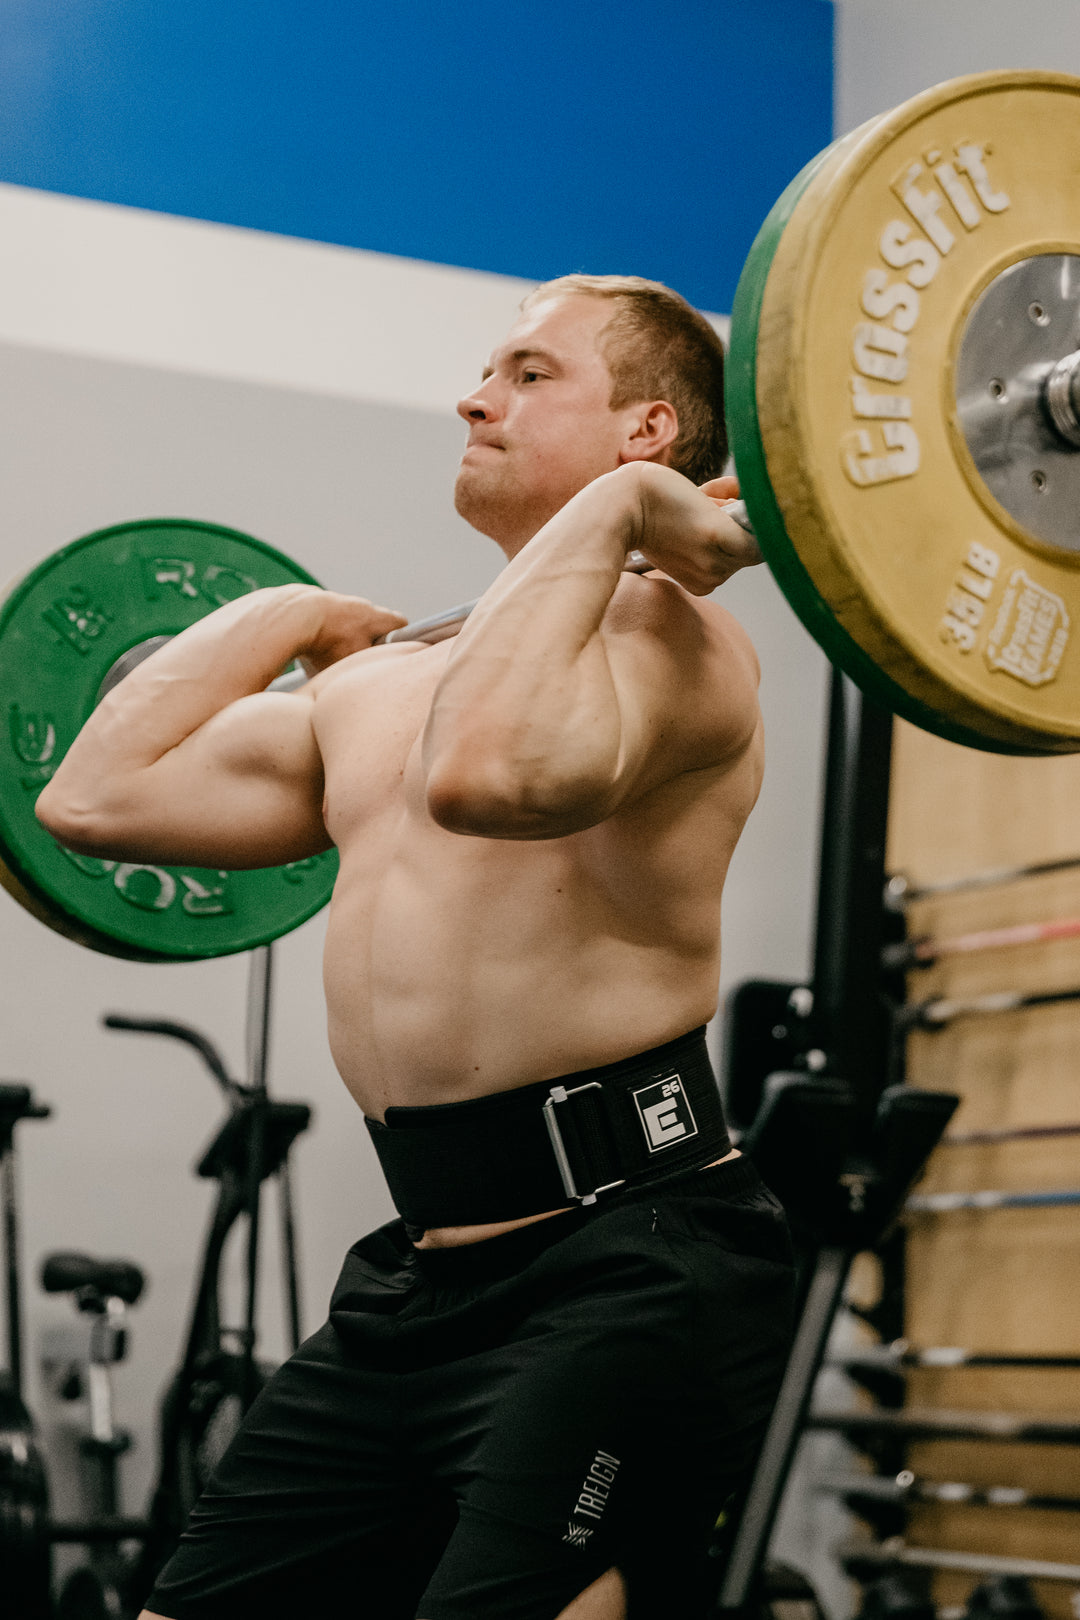 Does a Weight Lifting Belt Prevent Hernias?